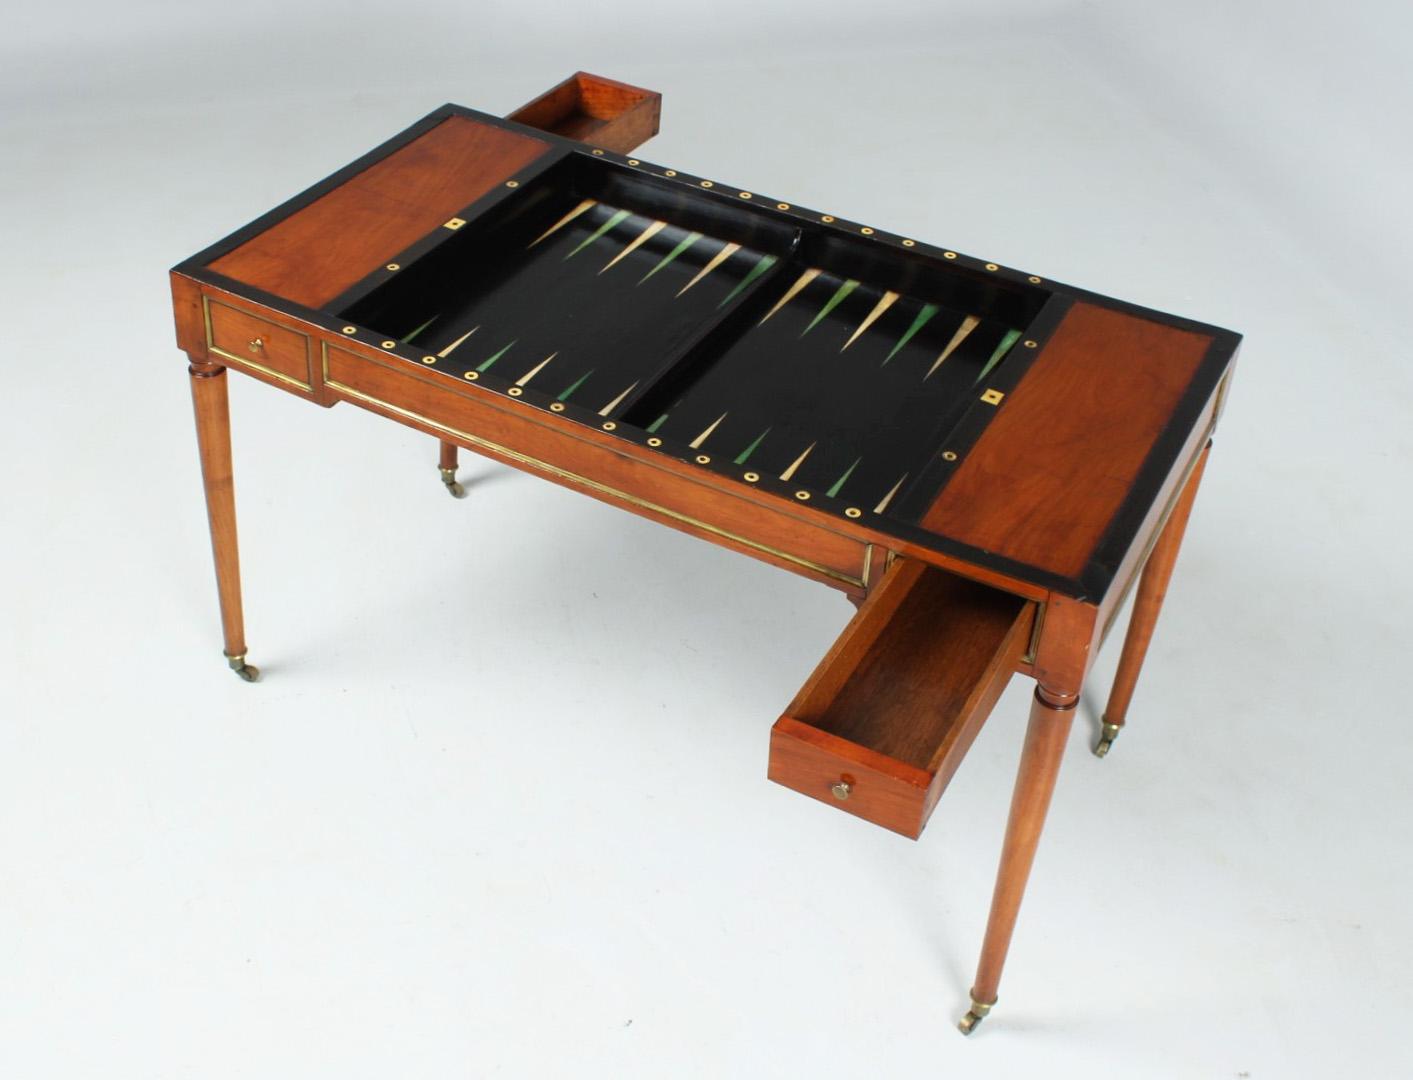 18th Century Antique Backgammon Table, so-called Tric Trac Table, Cherry, France, Louis XVI